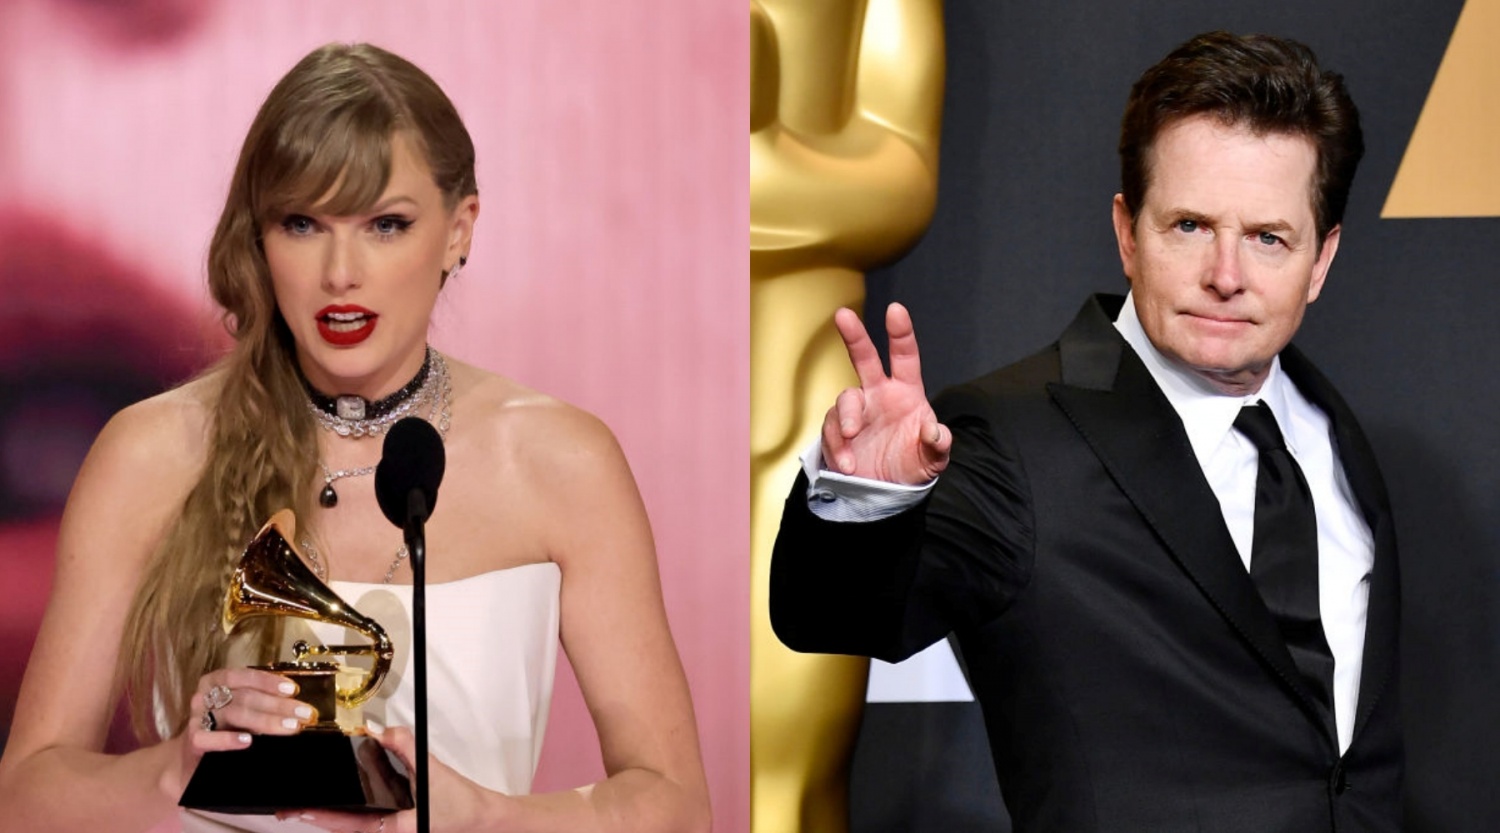 Michael J. Fox Comments on Taylor Swift's Influence